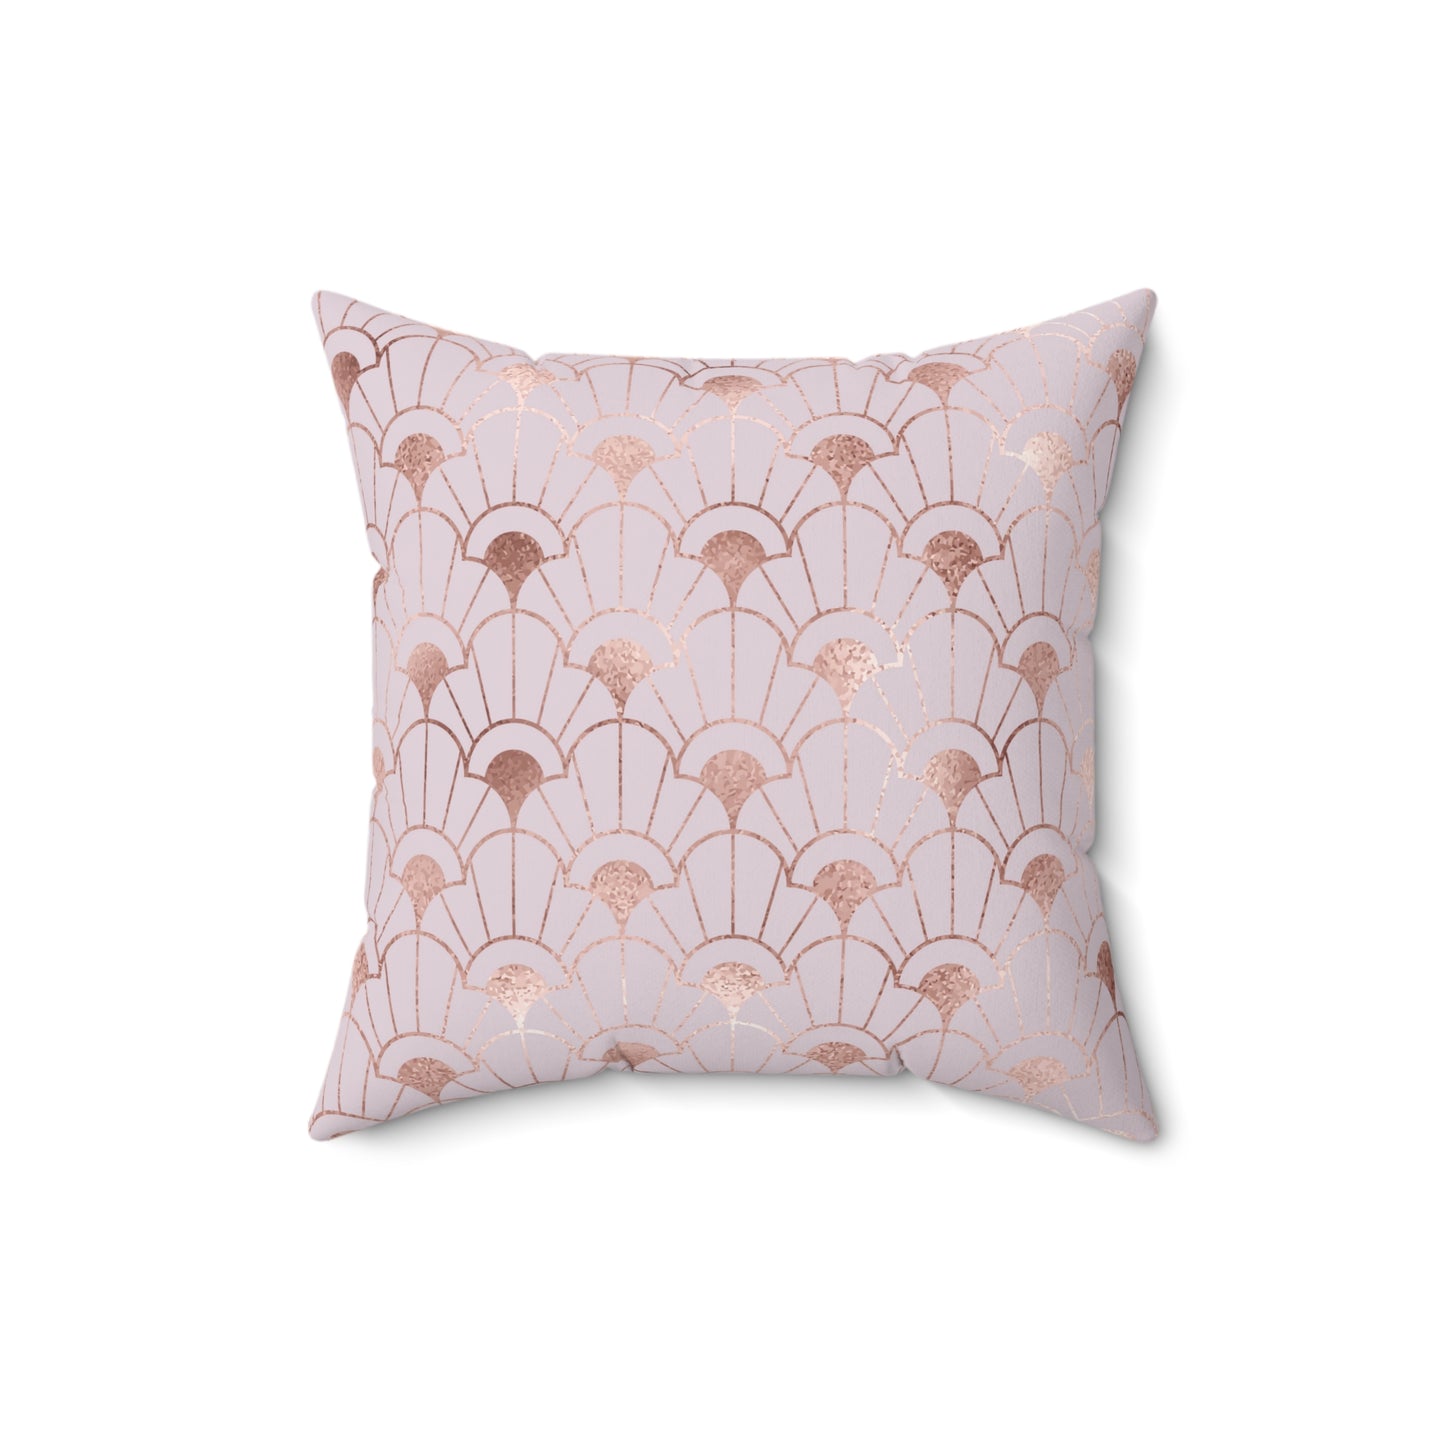 Rose Gold Art Deco Flowers Spun Polyester Square Pillow with Insert